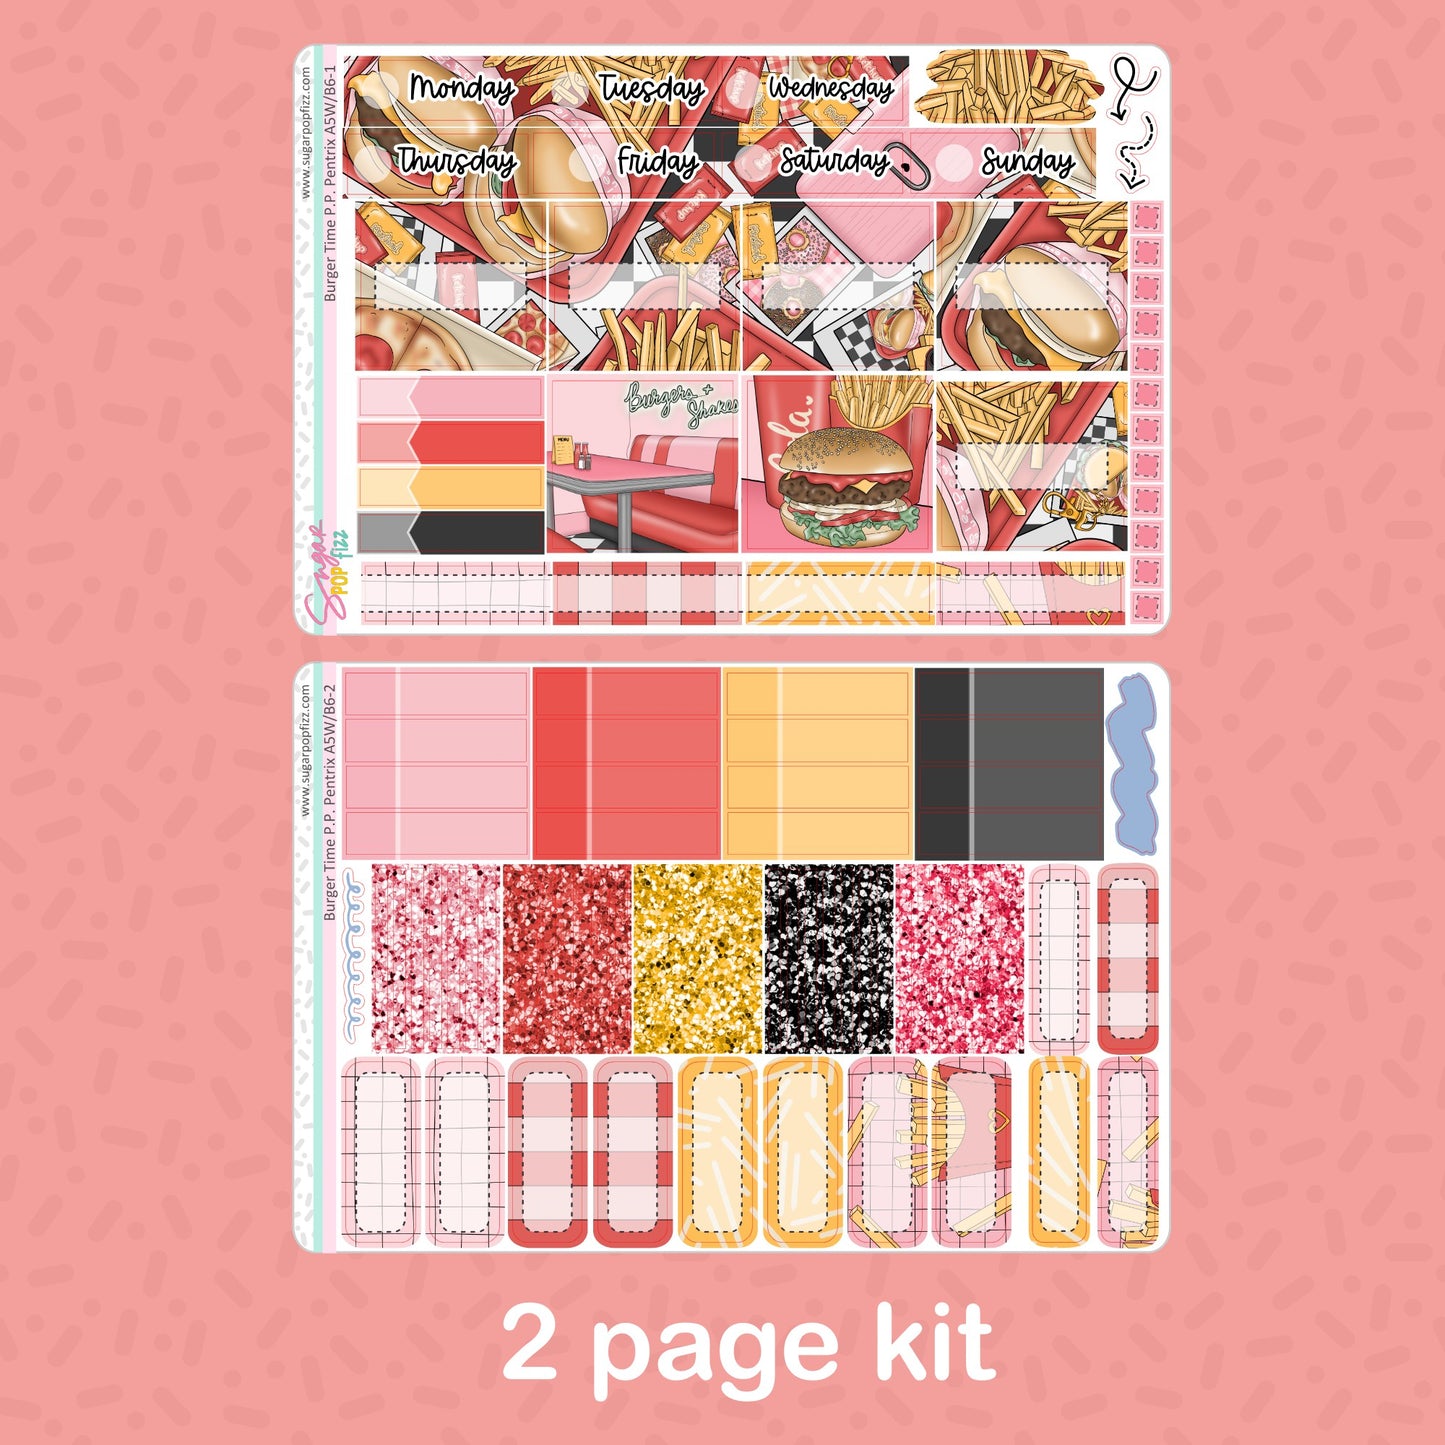 Burger Time Penny Pages Pentrix Weekly Kit